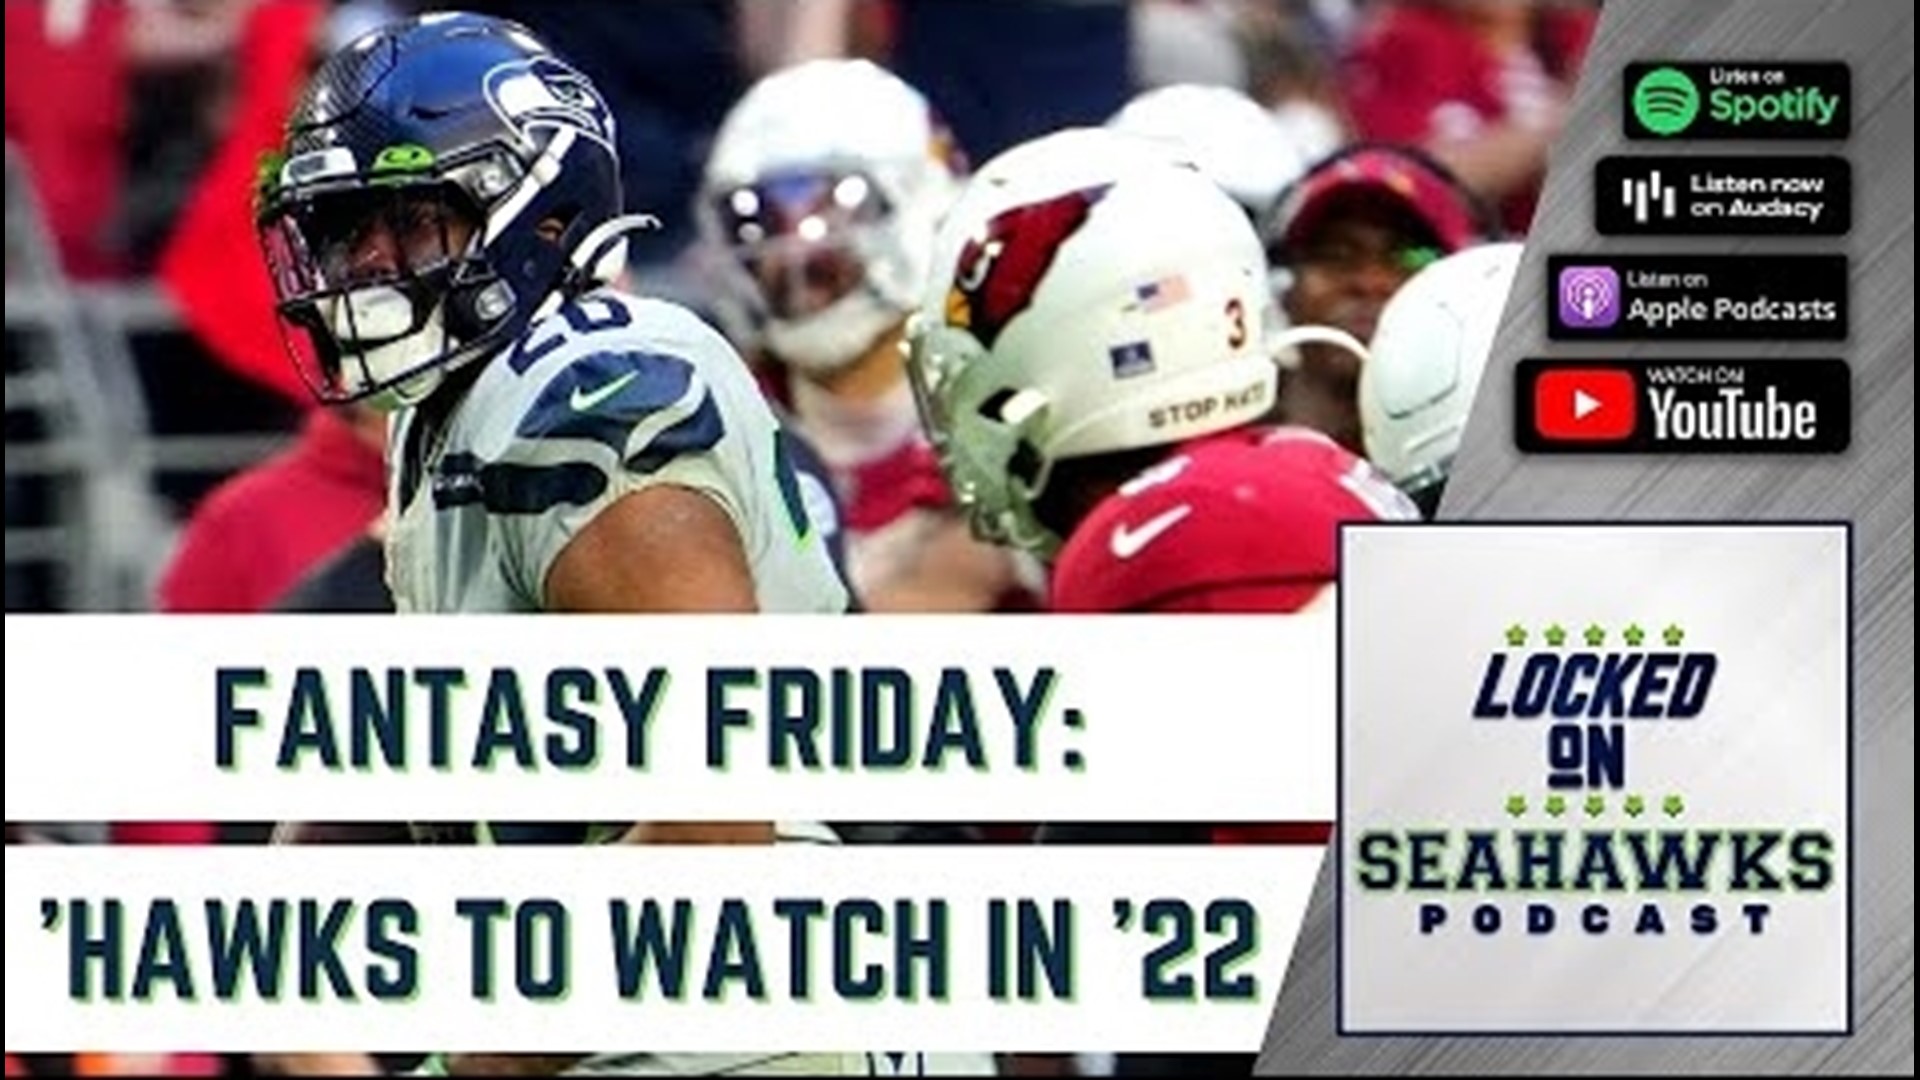 In the first-ever "Fantasy Friday" on Locked On Seahawks, host Nick Lee breaks down his fantasy team building philosophy and strategy.